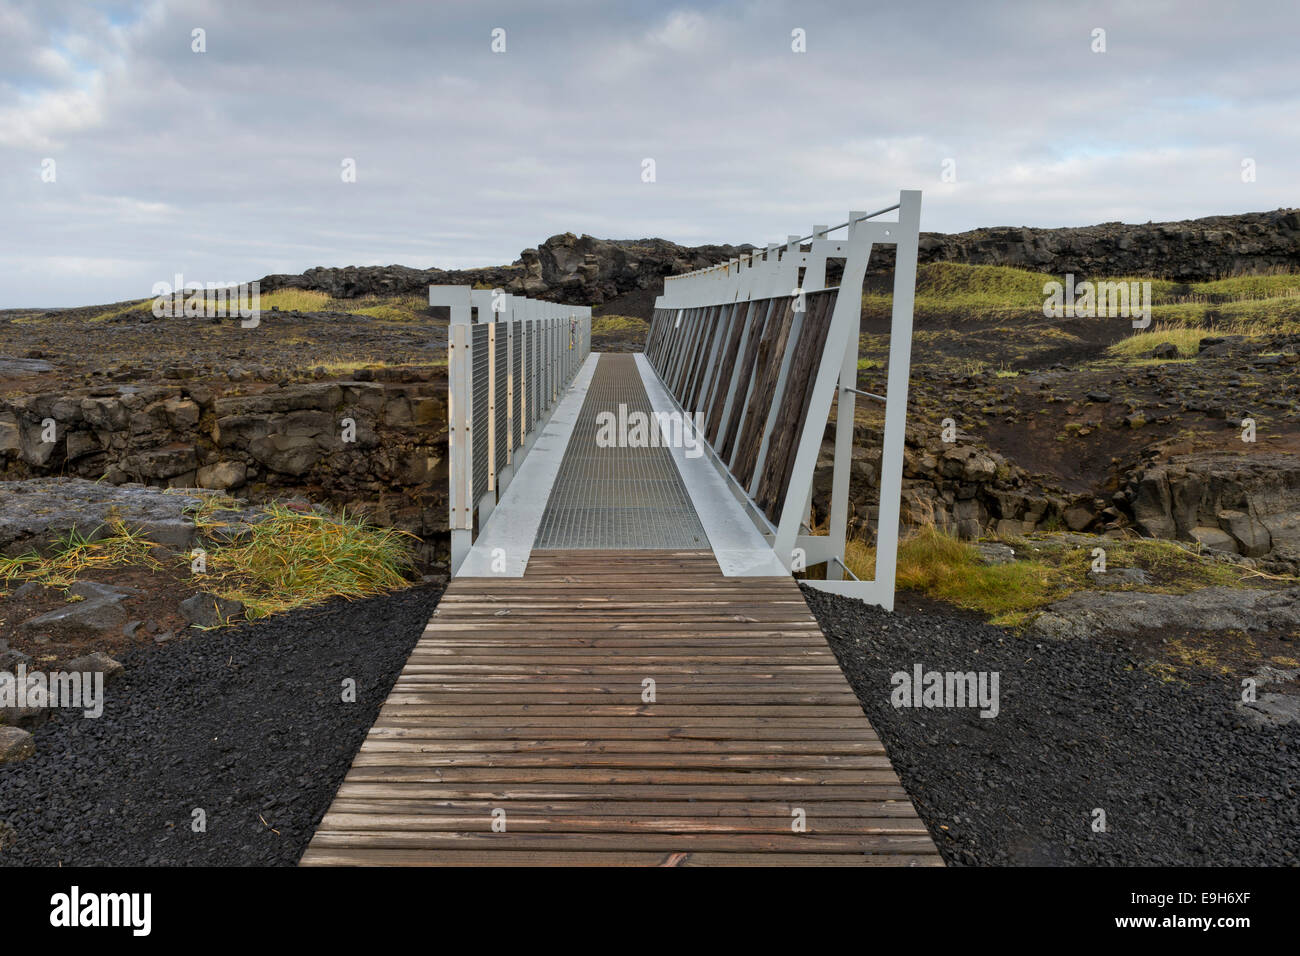 Bridge between the continents crosses the fracture zone between the American and European tectonic plates Stock Photo